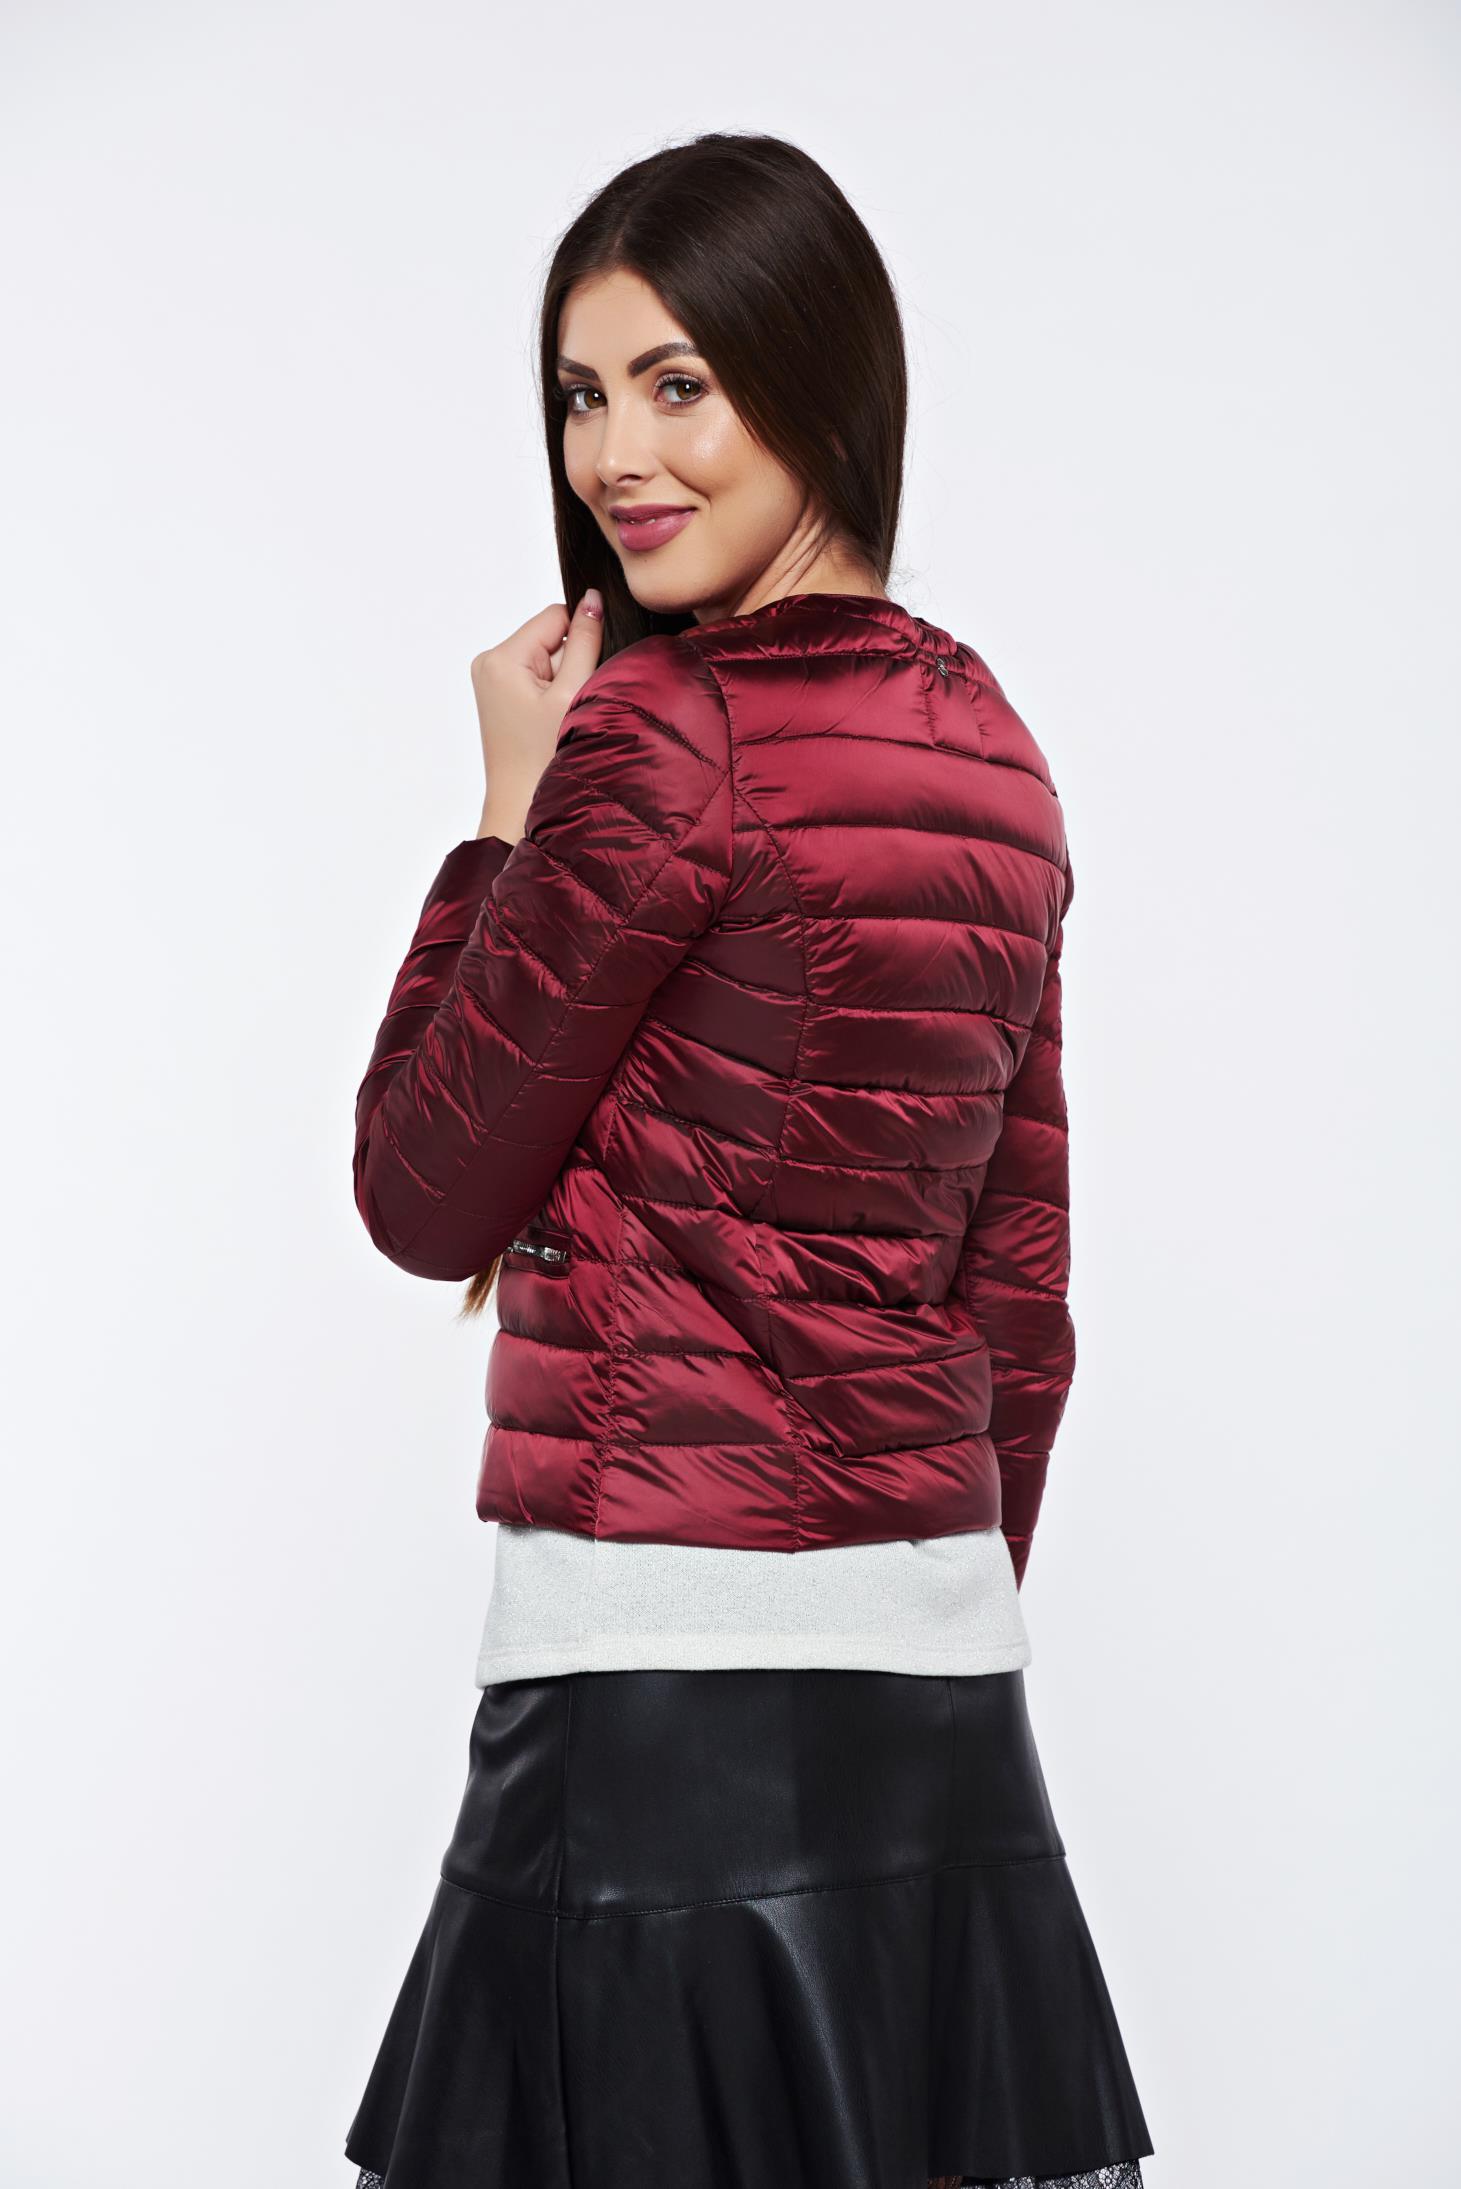 Top Secret casual short with inside lining burgundy jacket from slicker